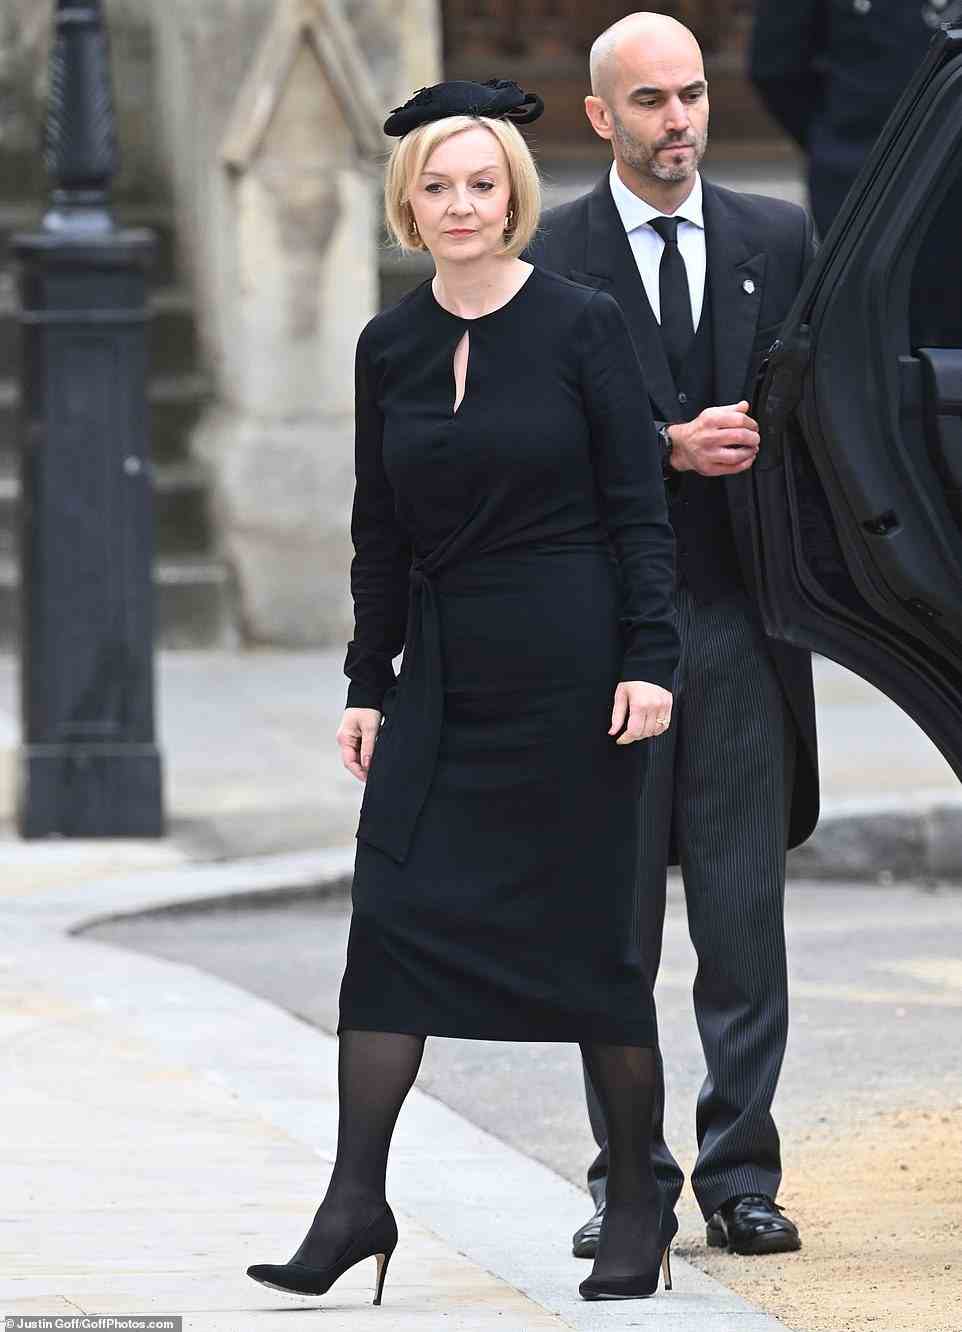 Newly elected Prime Minister Liz Truss looked dignified as she arrived at Westminster Abbey for the service this morning, where she addressed the congregation